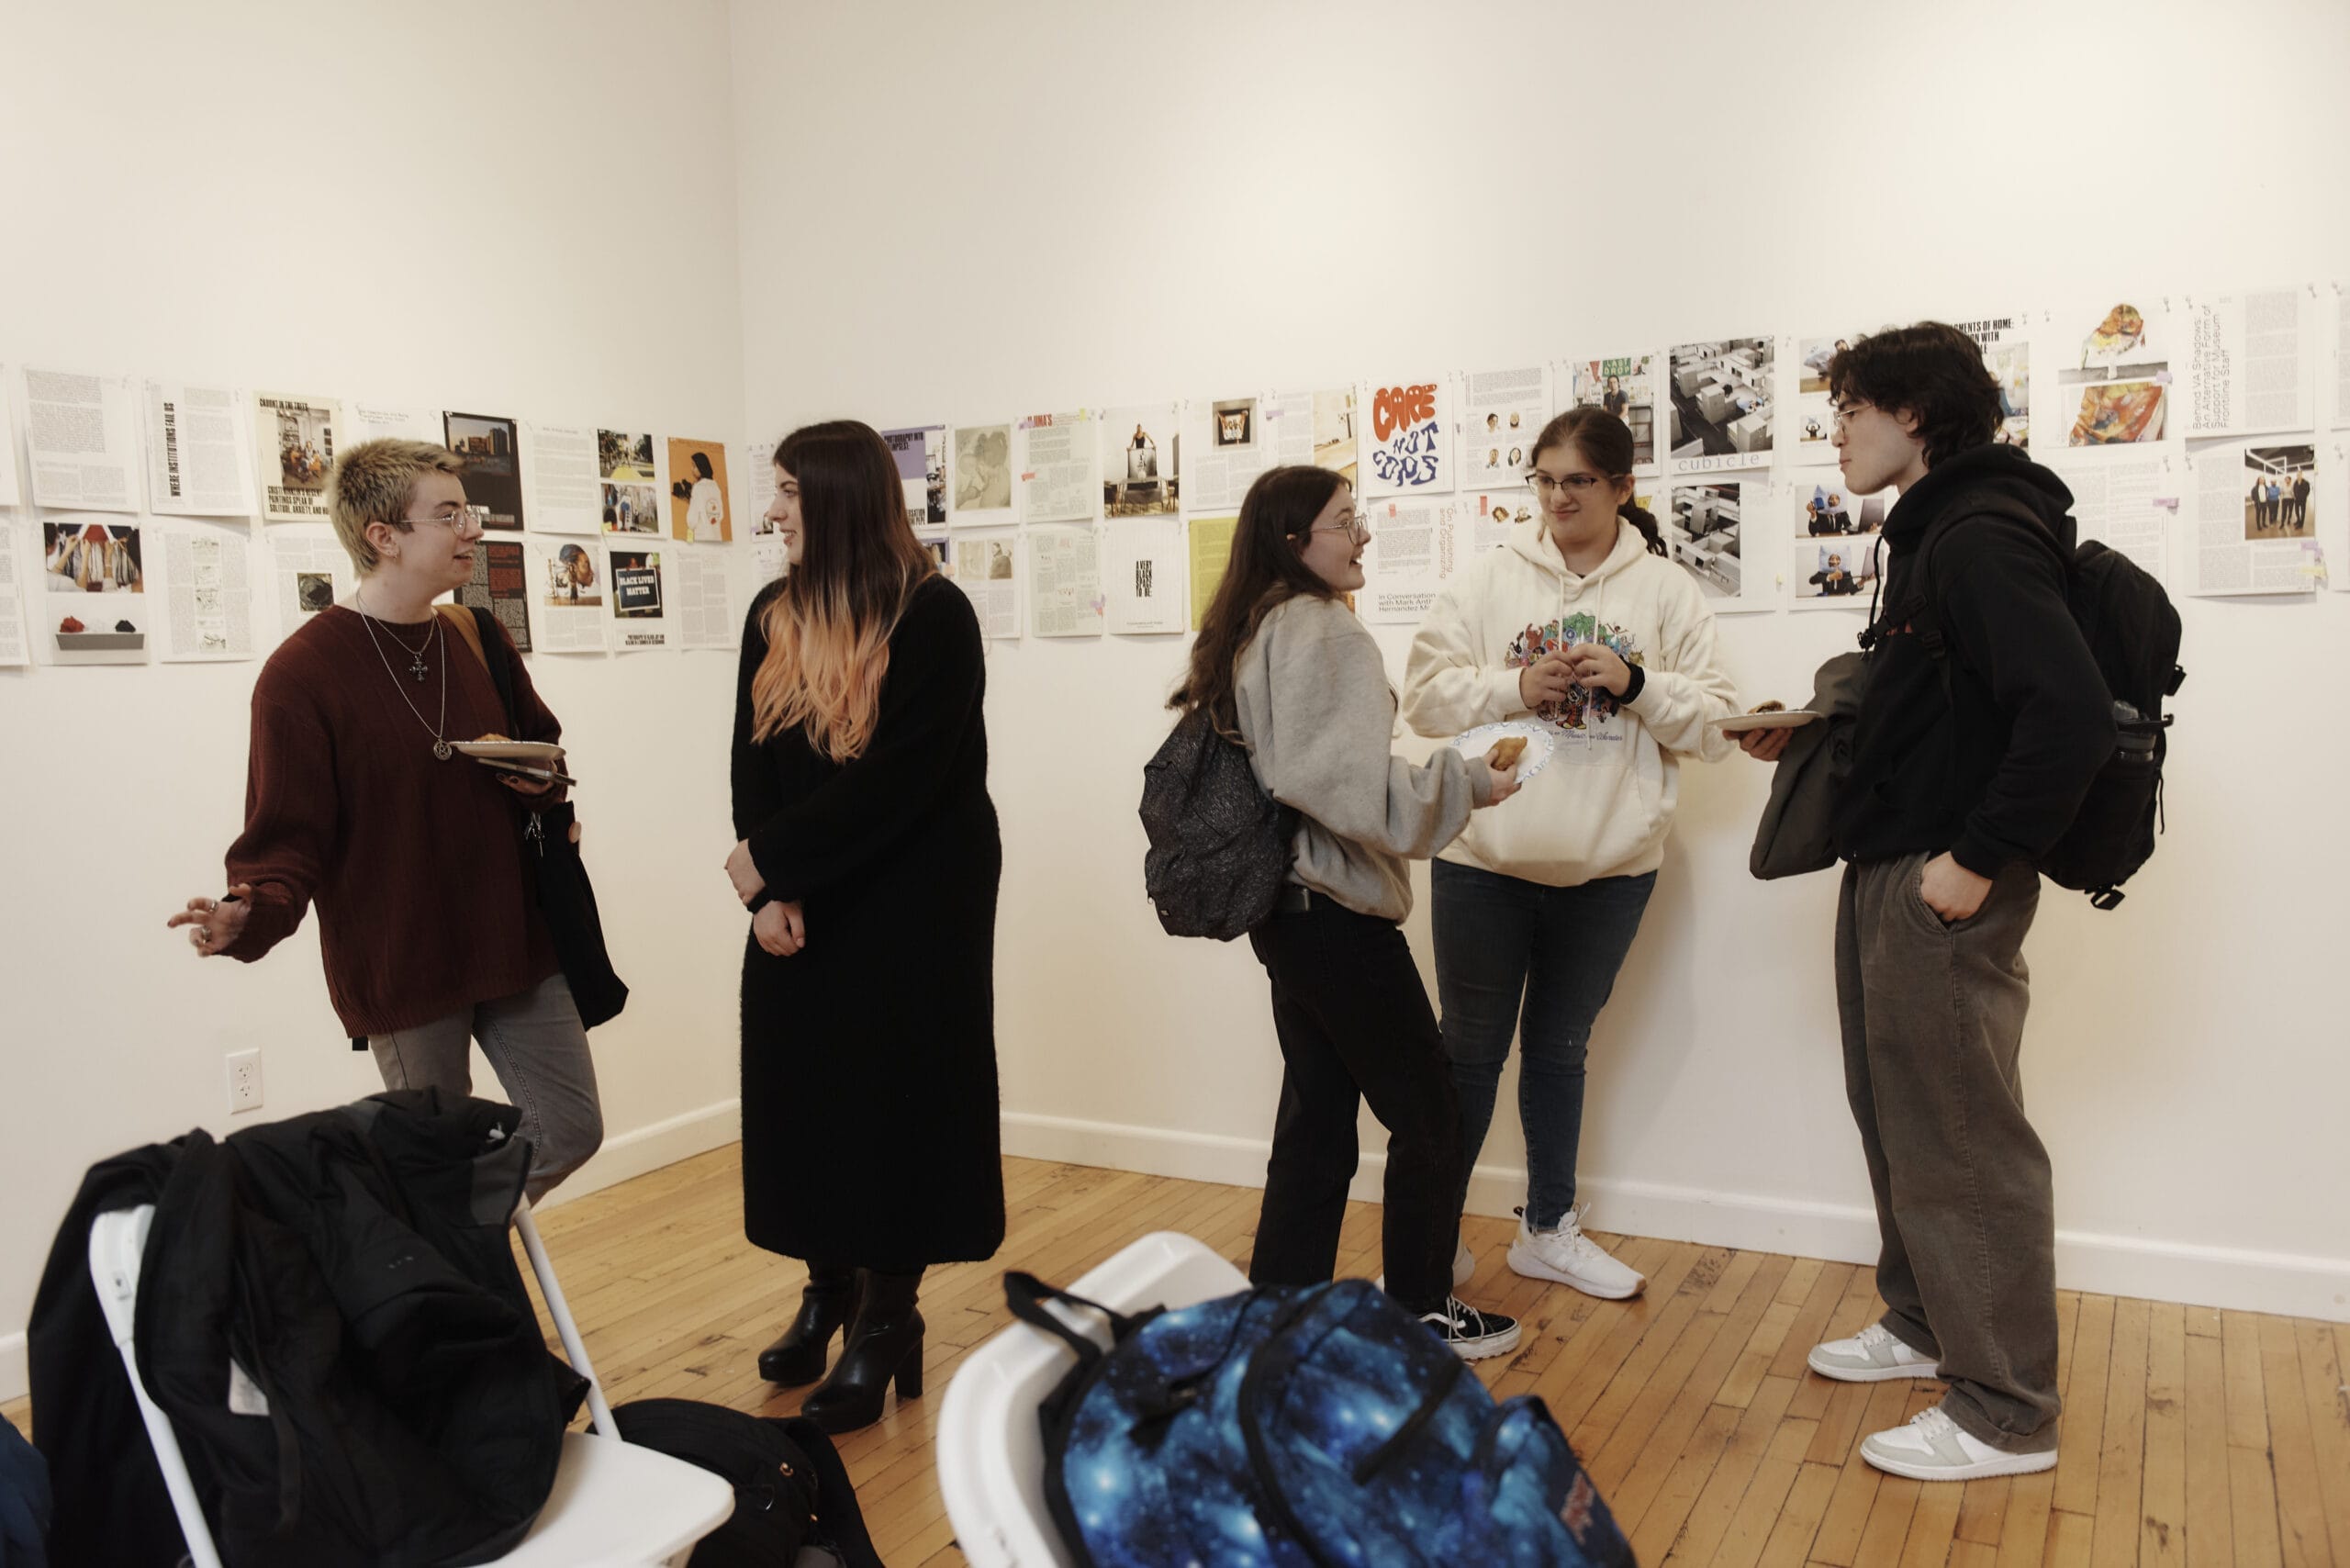 Students stand around chatting in a gallery.